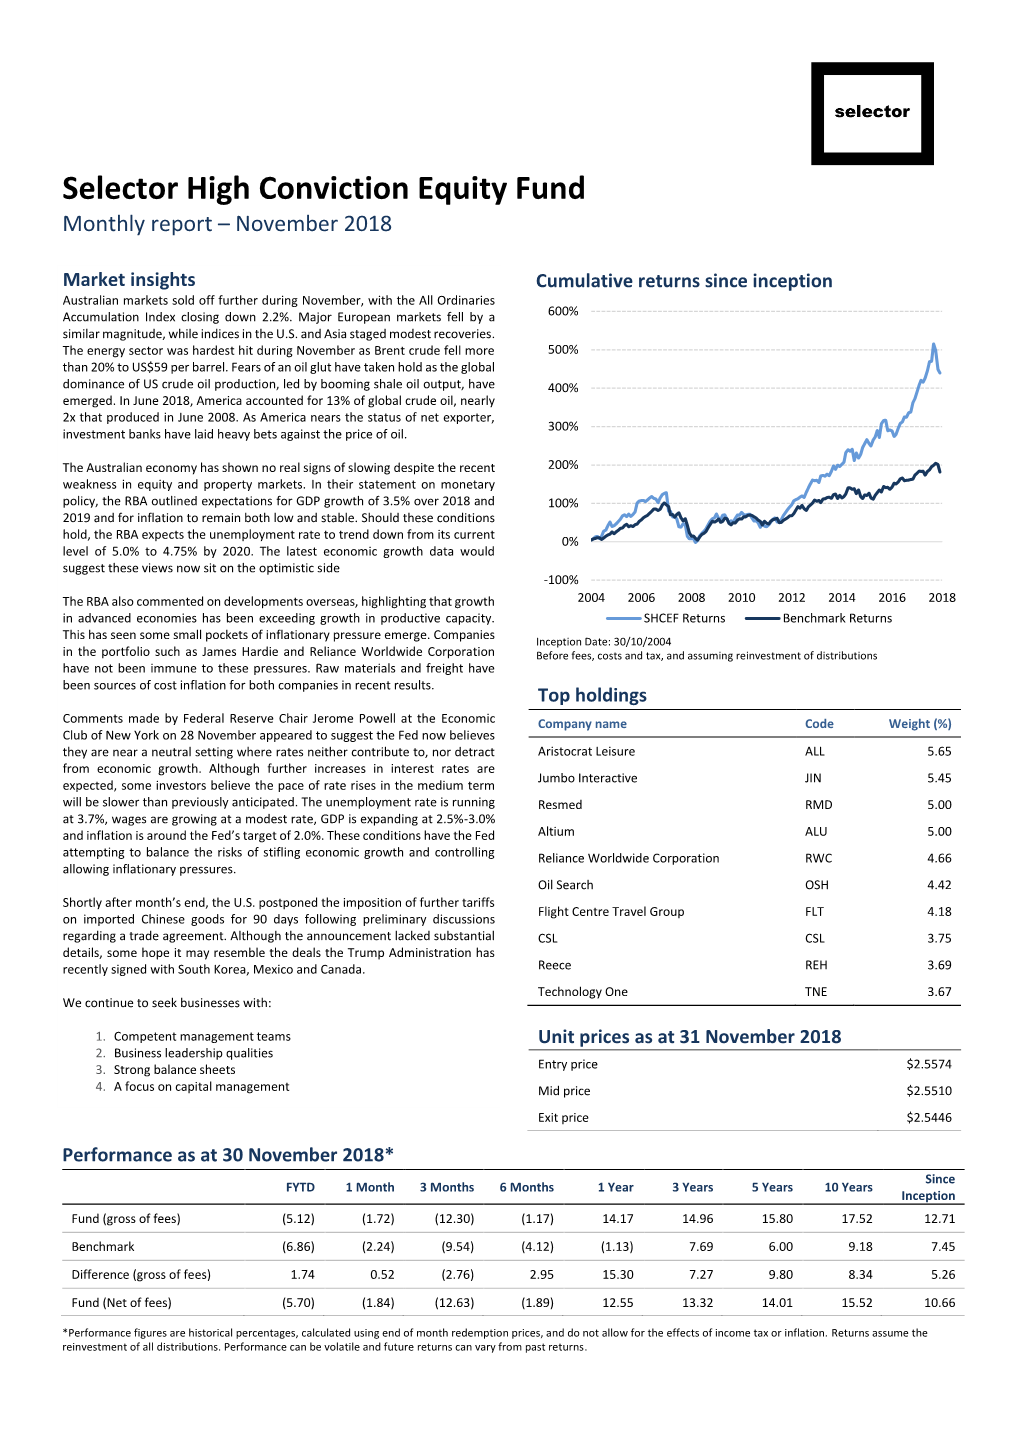 Selector High Conviction Equity Fund Monthly Report – November 2018